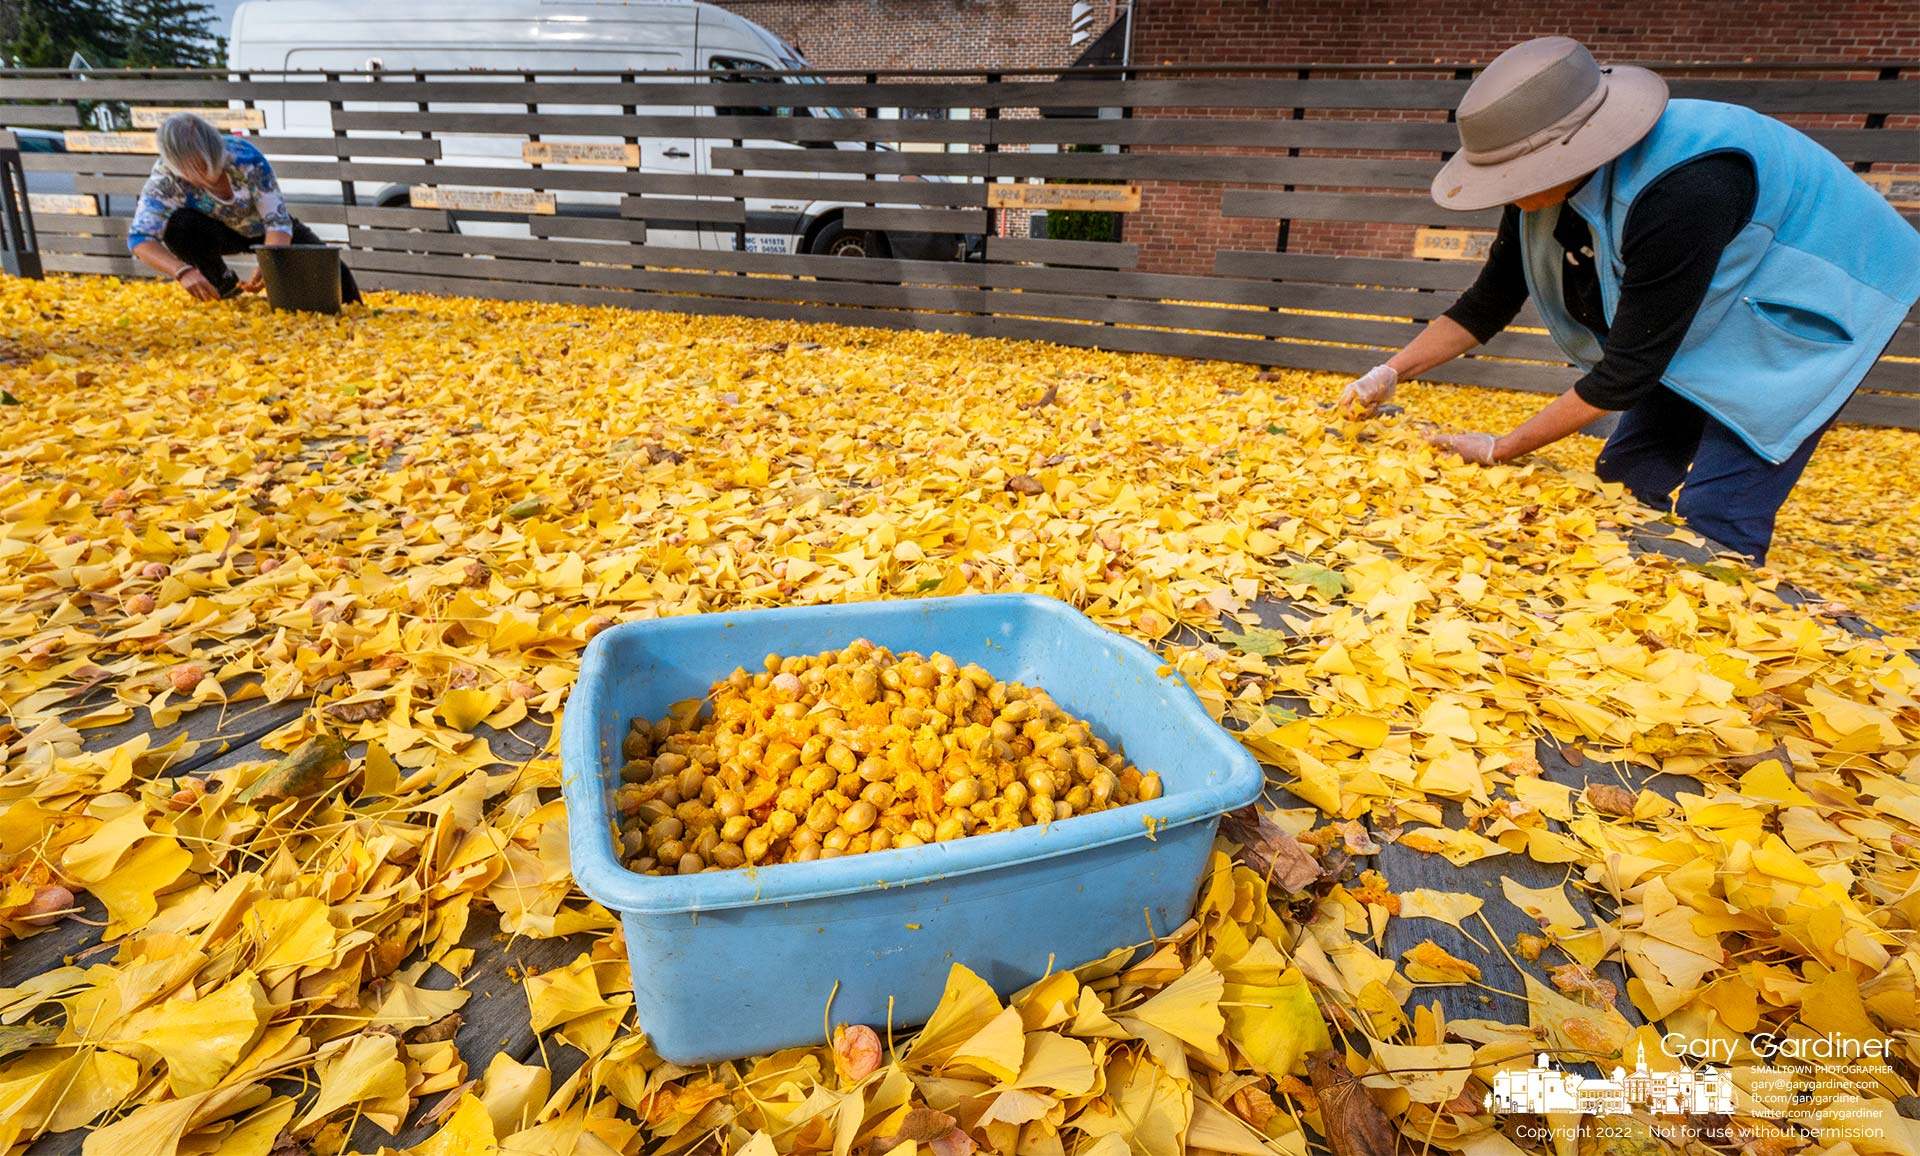 Two women collect ginkgo nuts from fallen fruit at the large tree that grows on the north side of city hall in Uptown Westerville. My Final Photo for November 5, 2022.